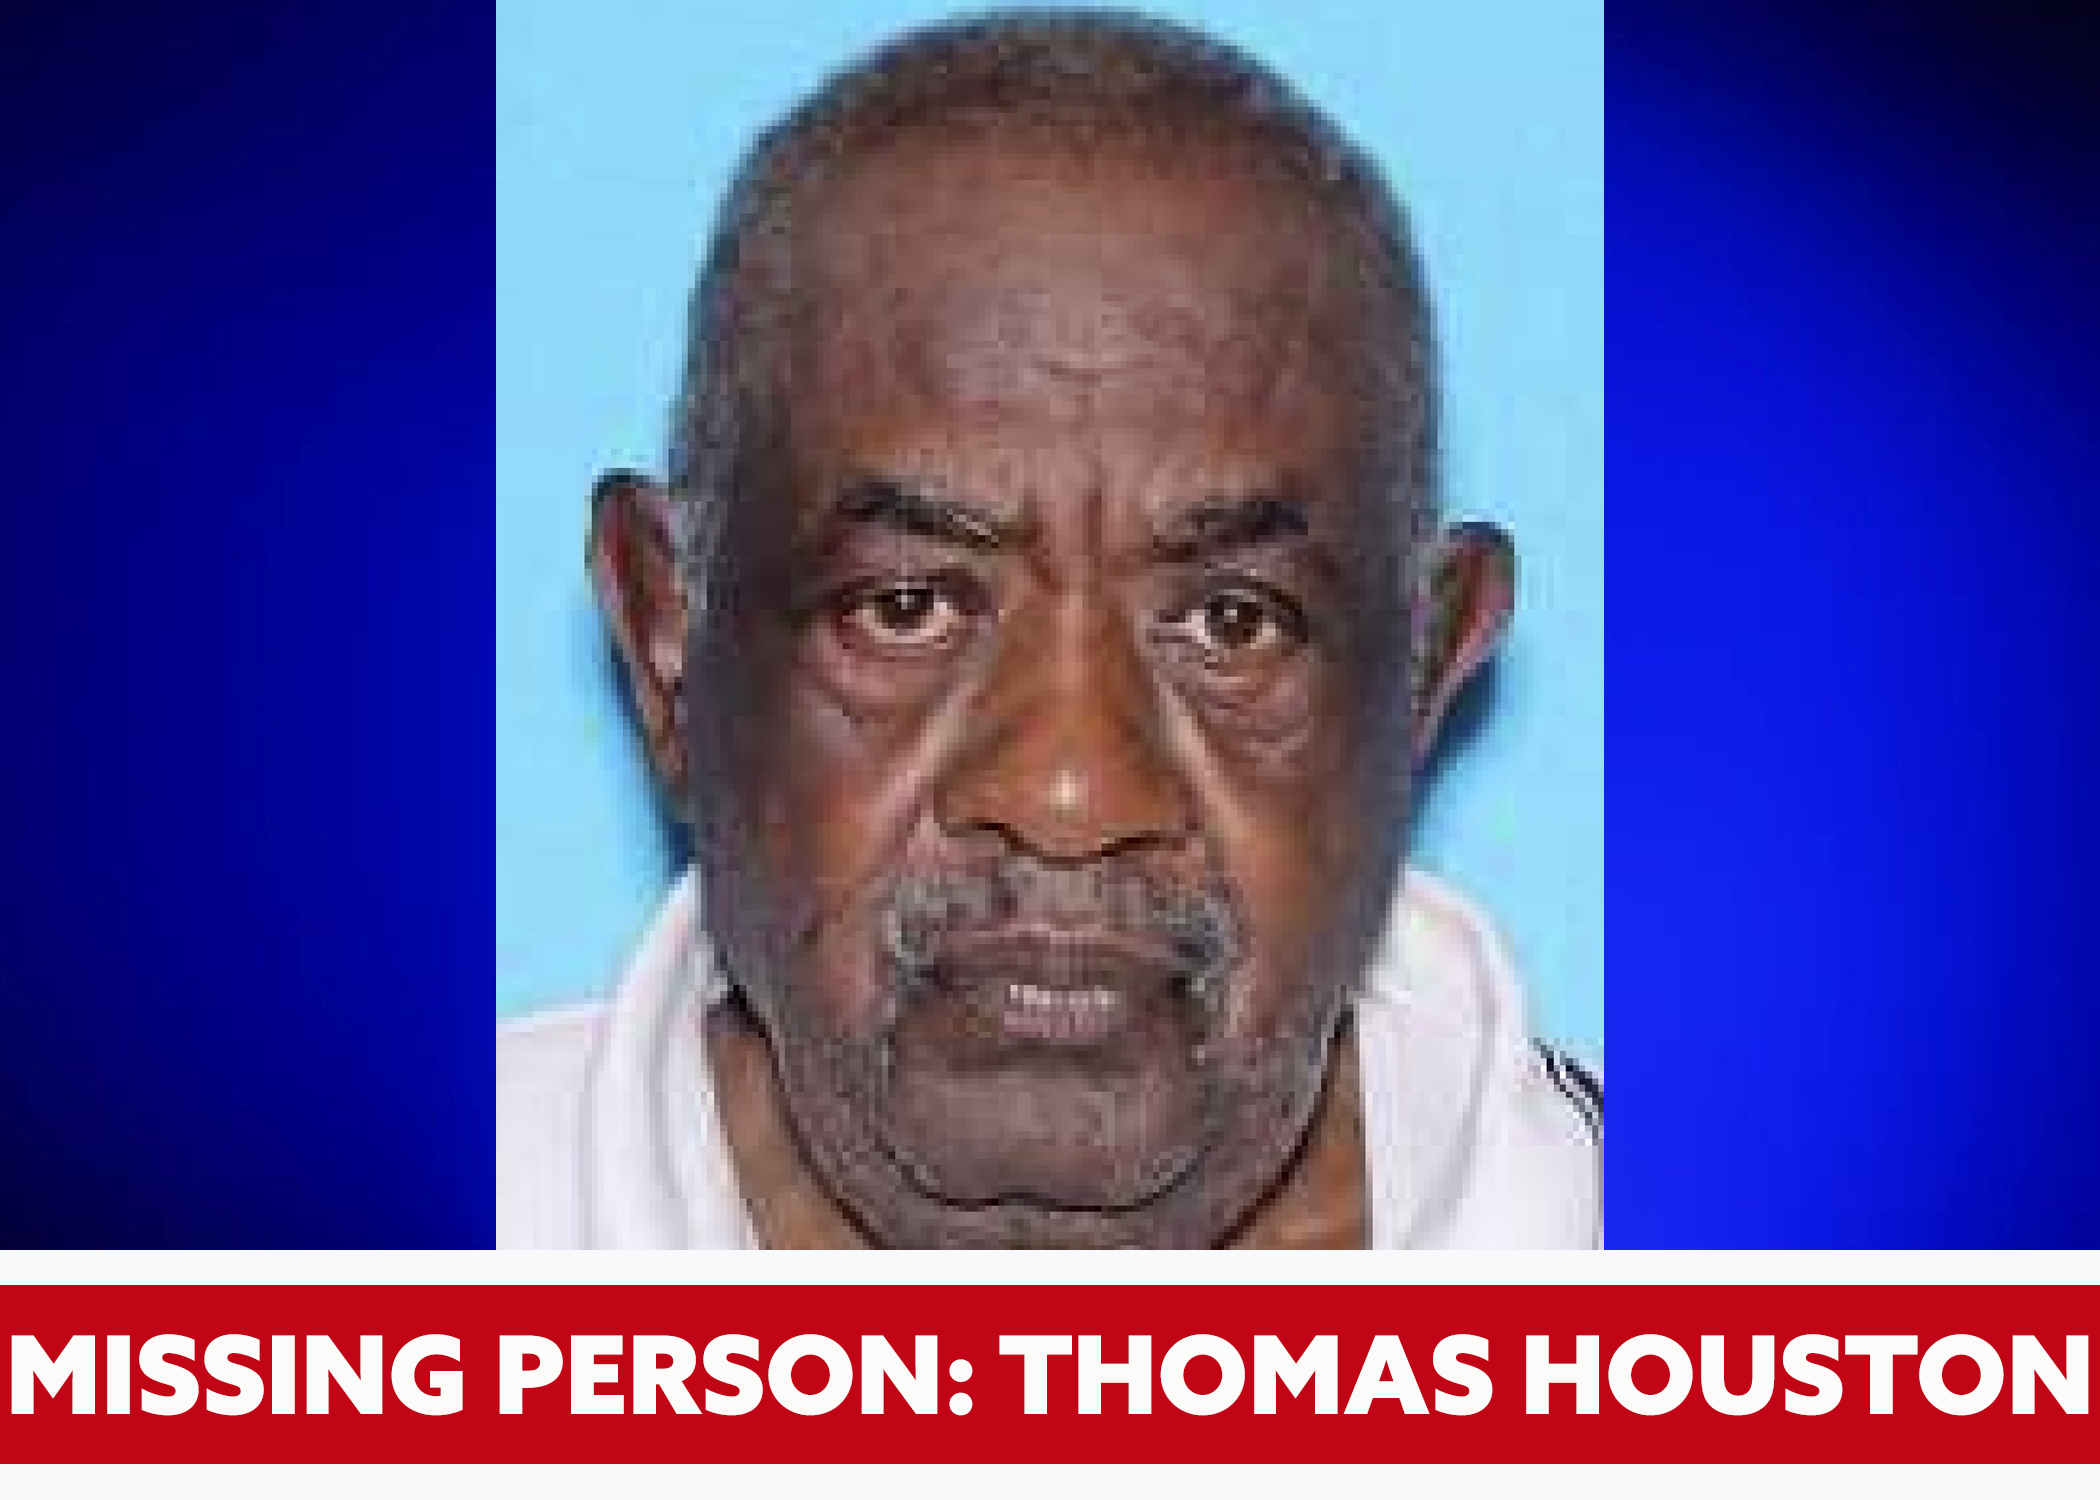 Missing & Endangered Persons Alert issued for 84-year-old Selma man